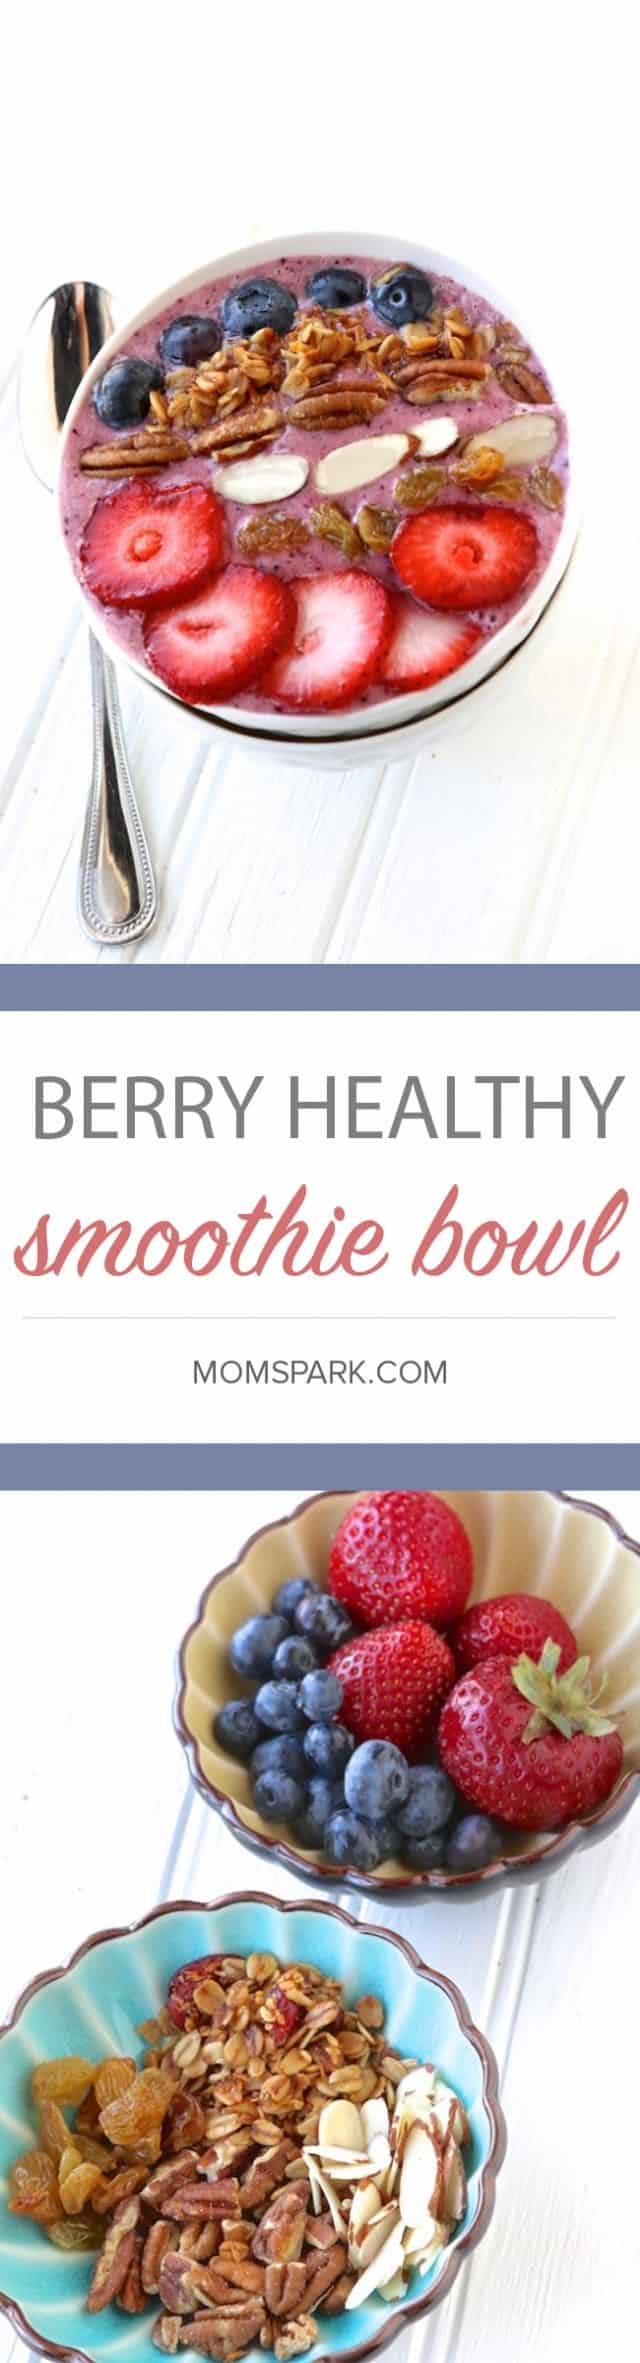 Berry Healthy Smoothie Bowl Recipe